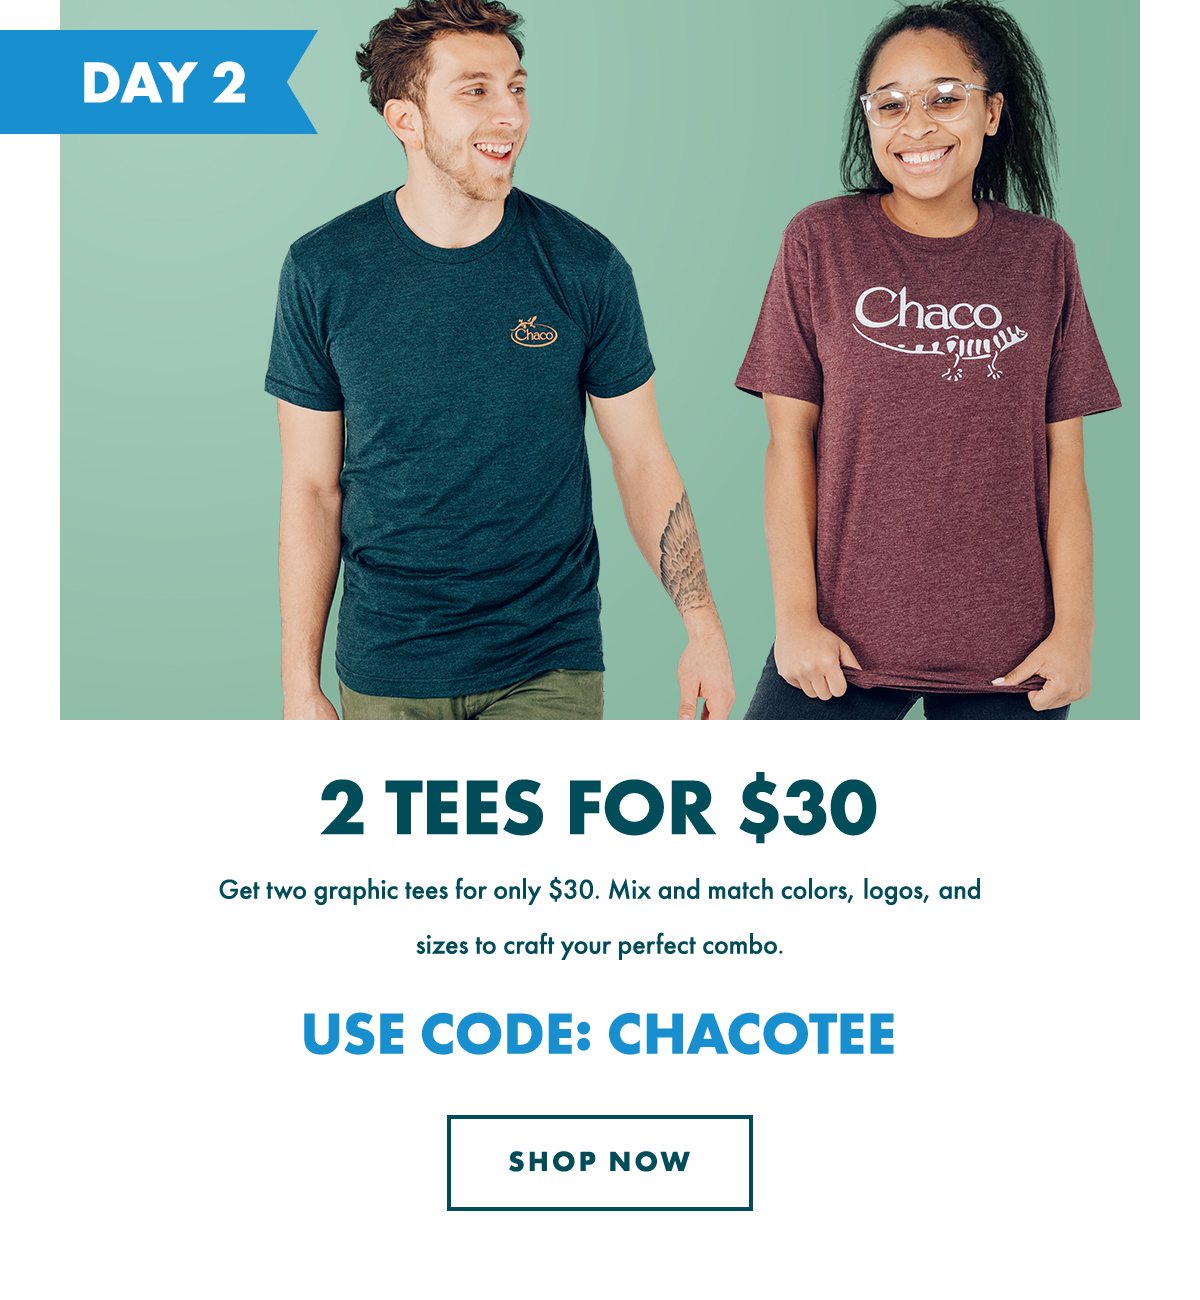 2 TEES FOR $30 - USE CODE: CHACOTEE